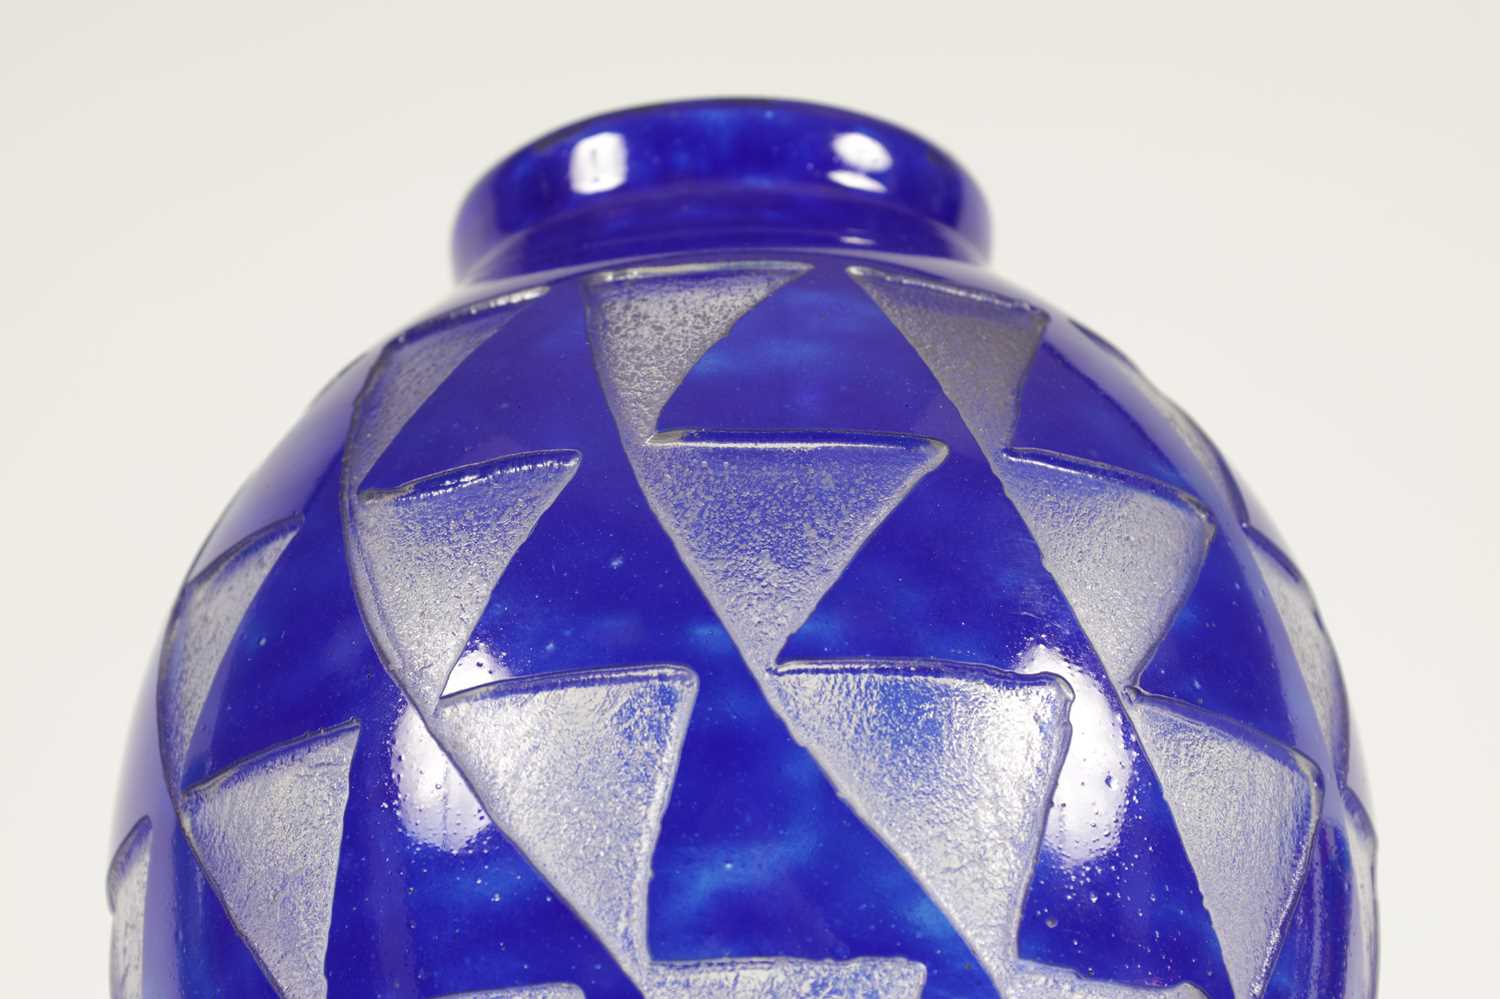 DAVID GUERON FOR DEGUE. A 1930'S FRENCH ART DECO GLASS VASE - Image 4 of 9